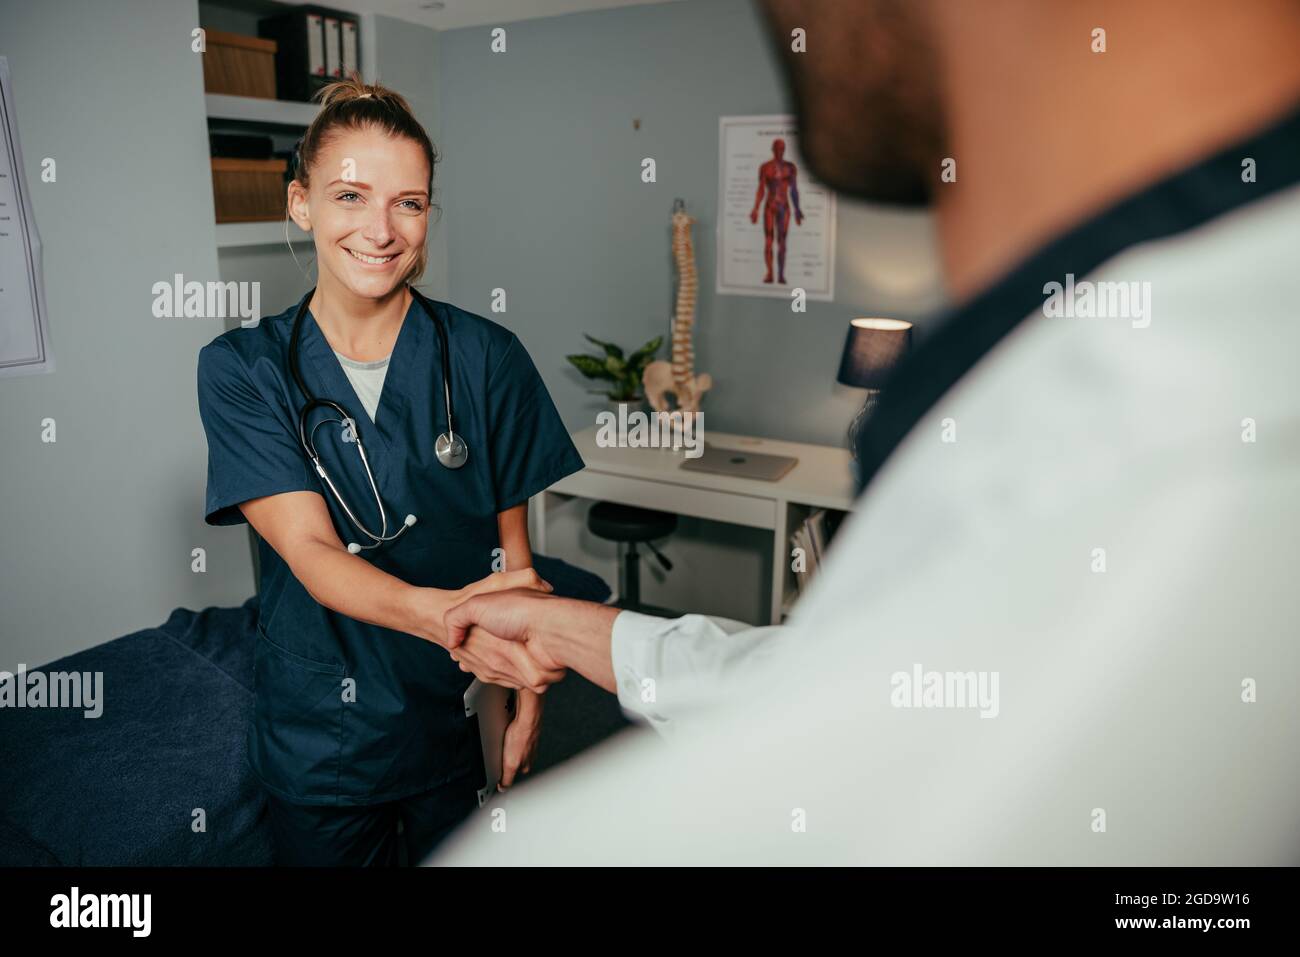 Caucasian female nurse shaking hands with male doctor  Stock Photo